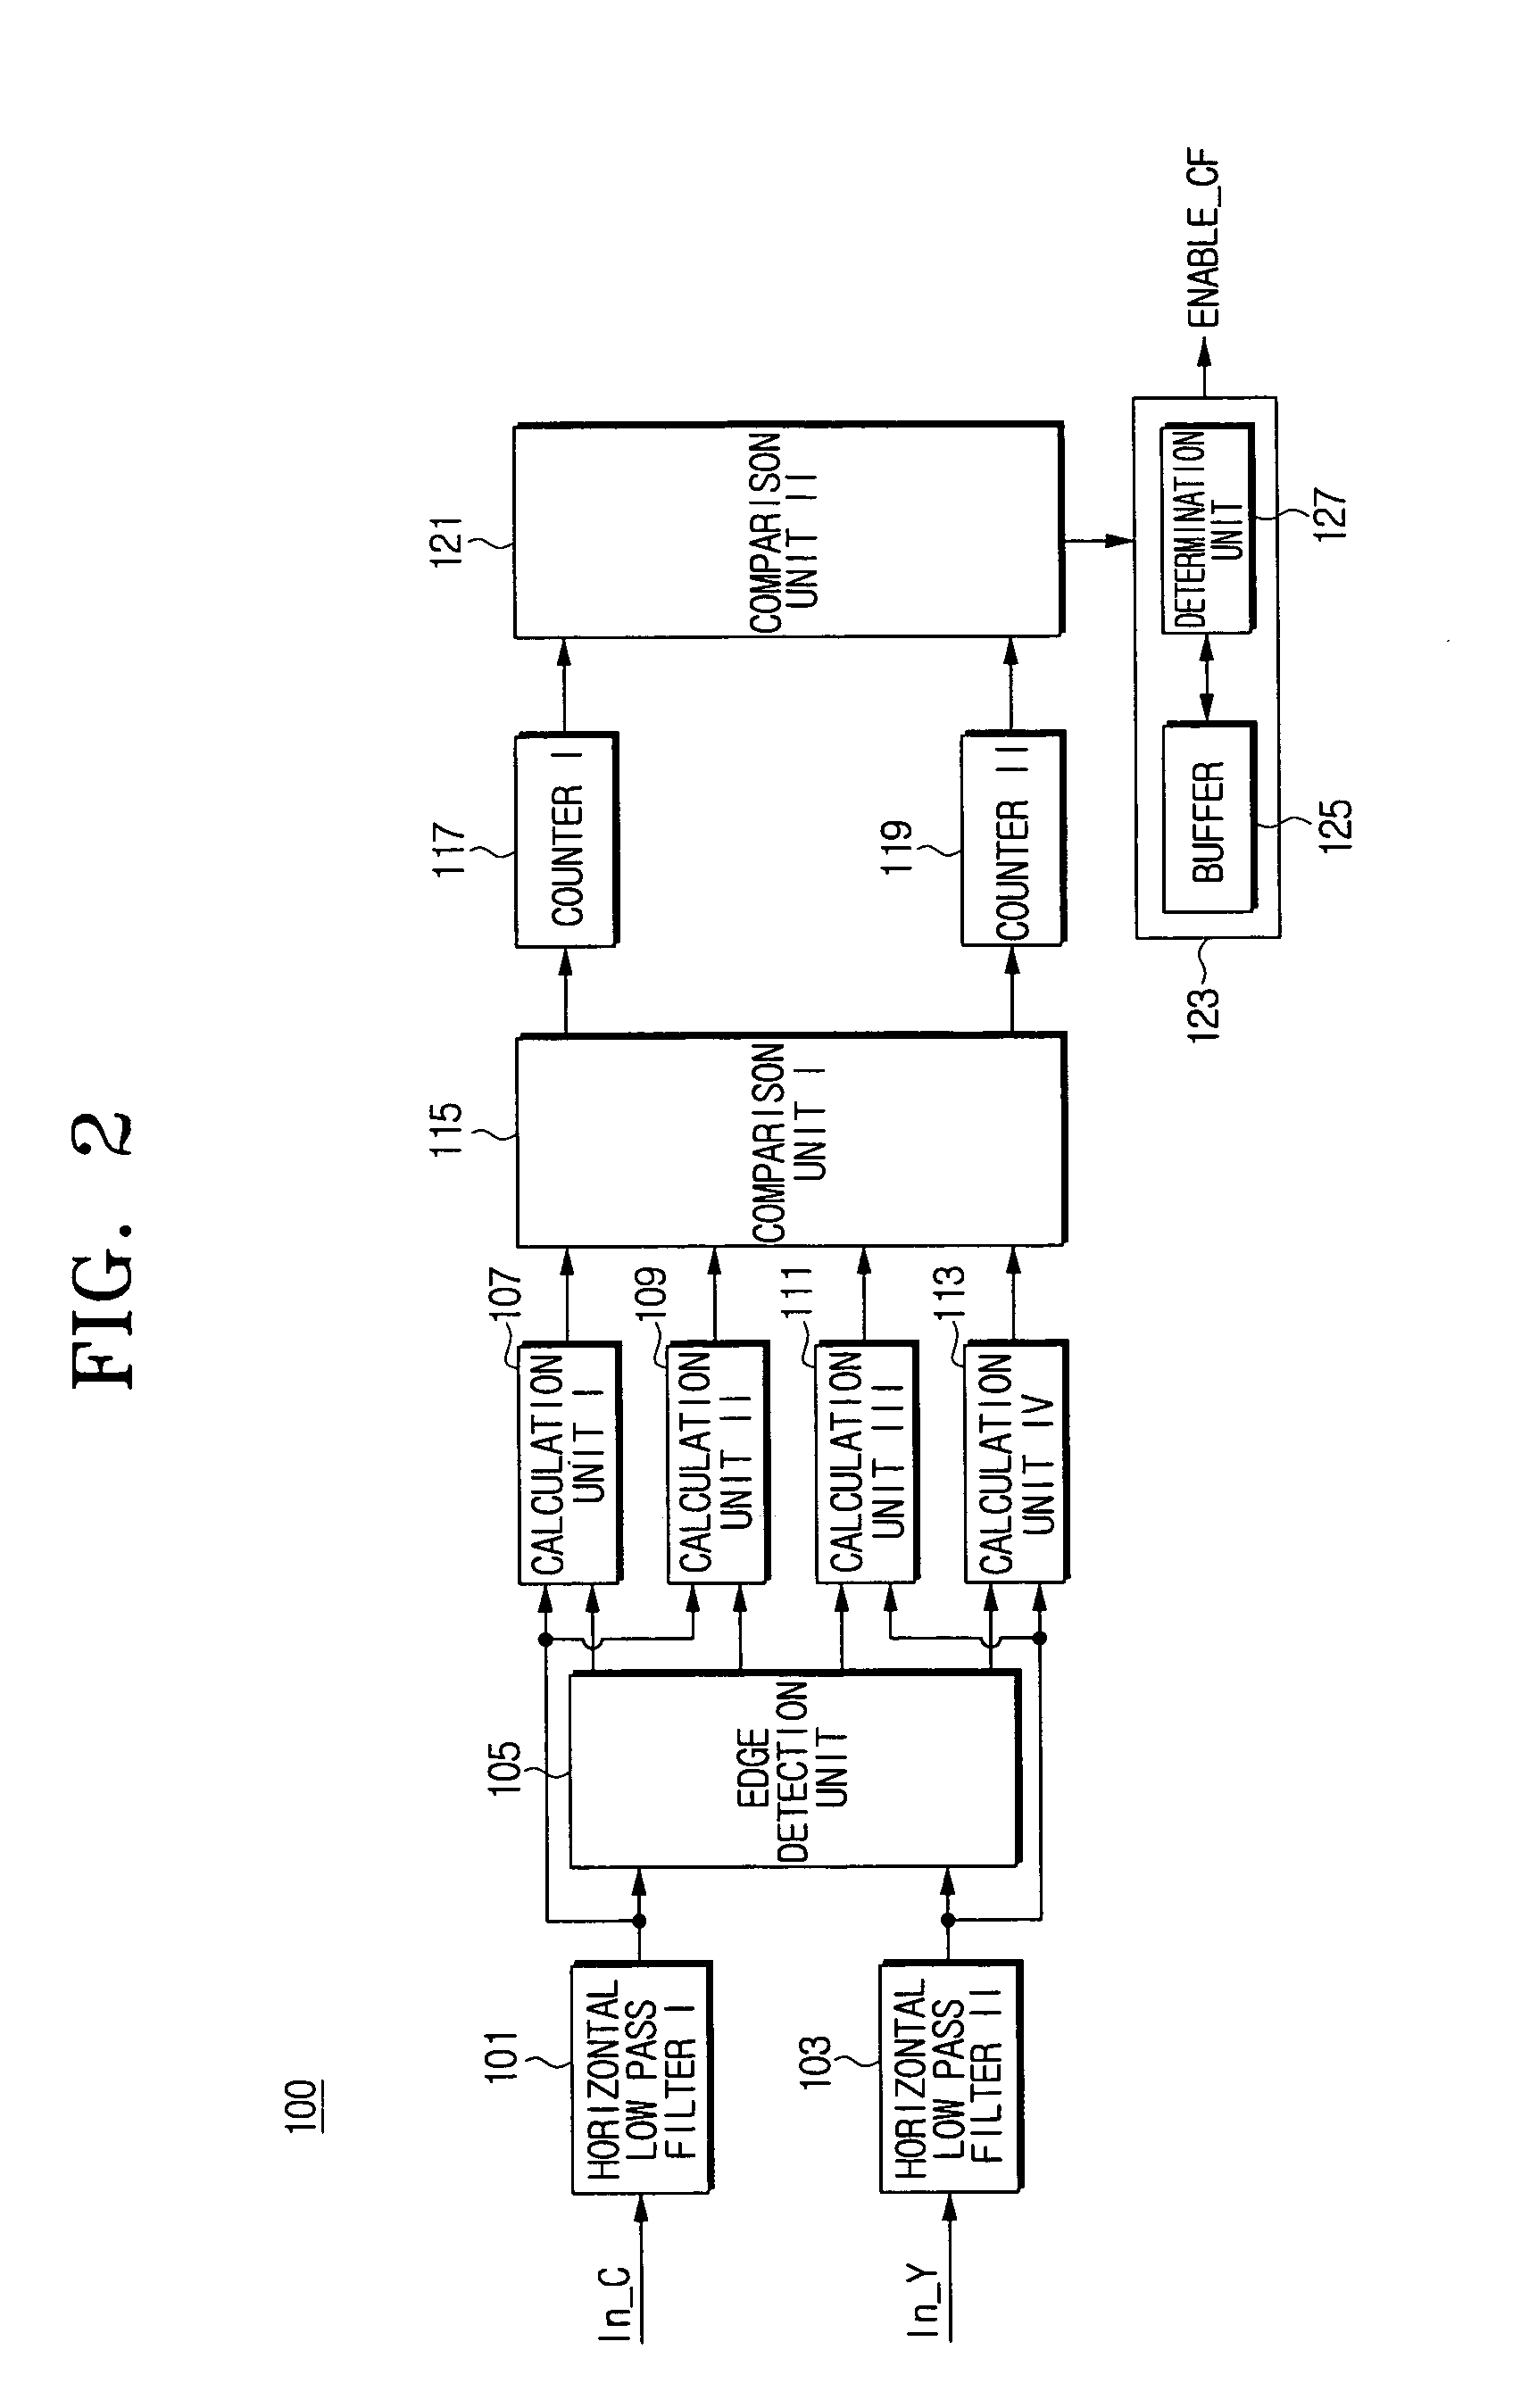 Apparatus and method for correcting color error by adaptively filtering chrominance signals